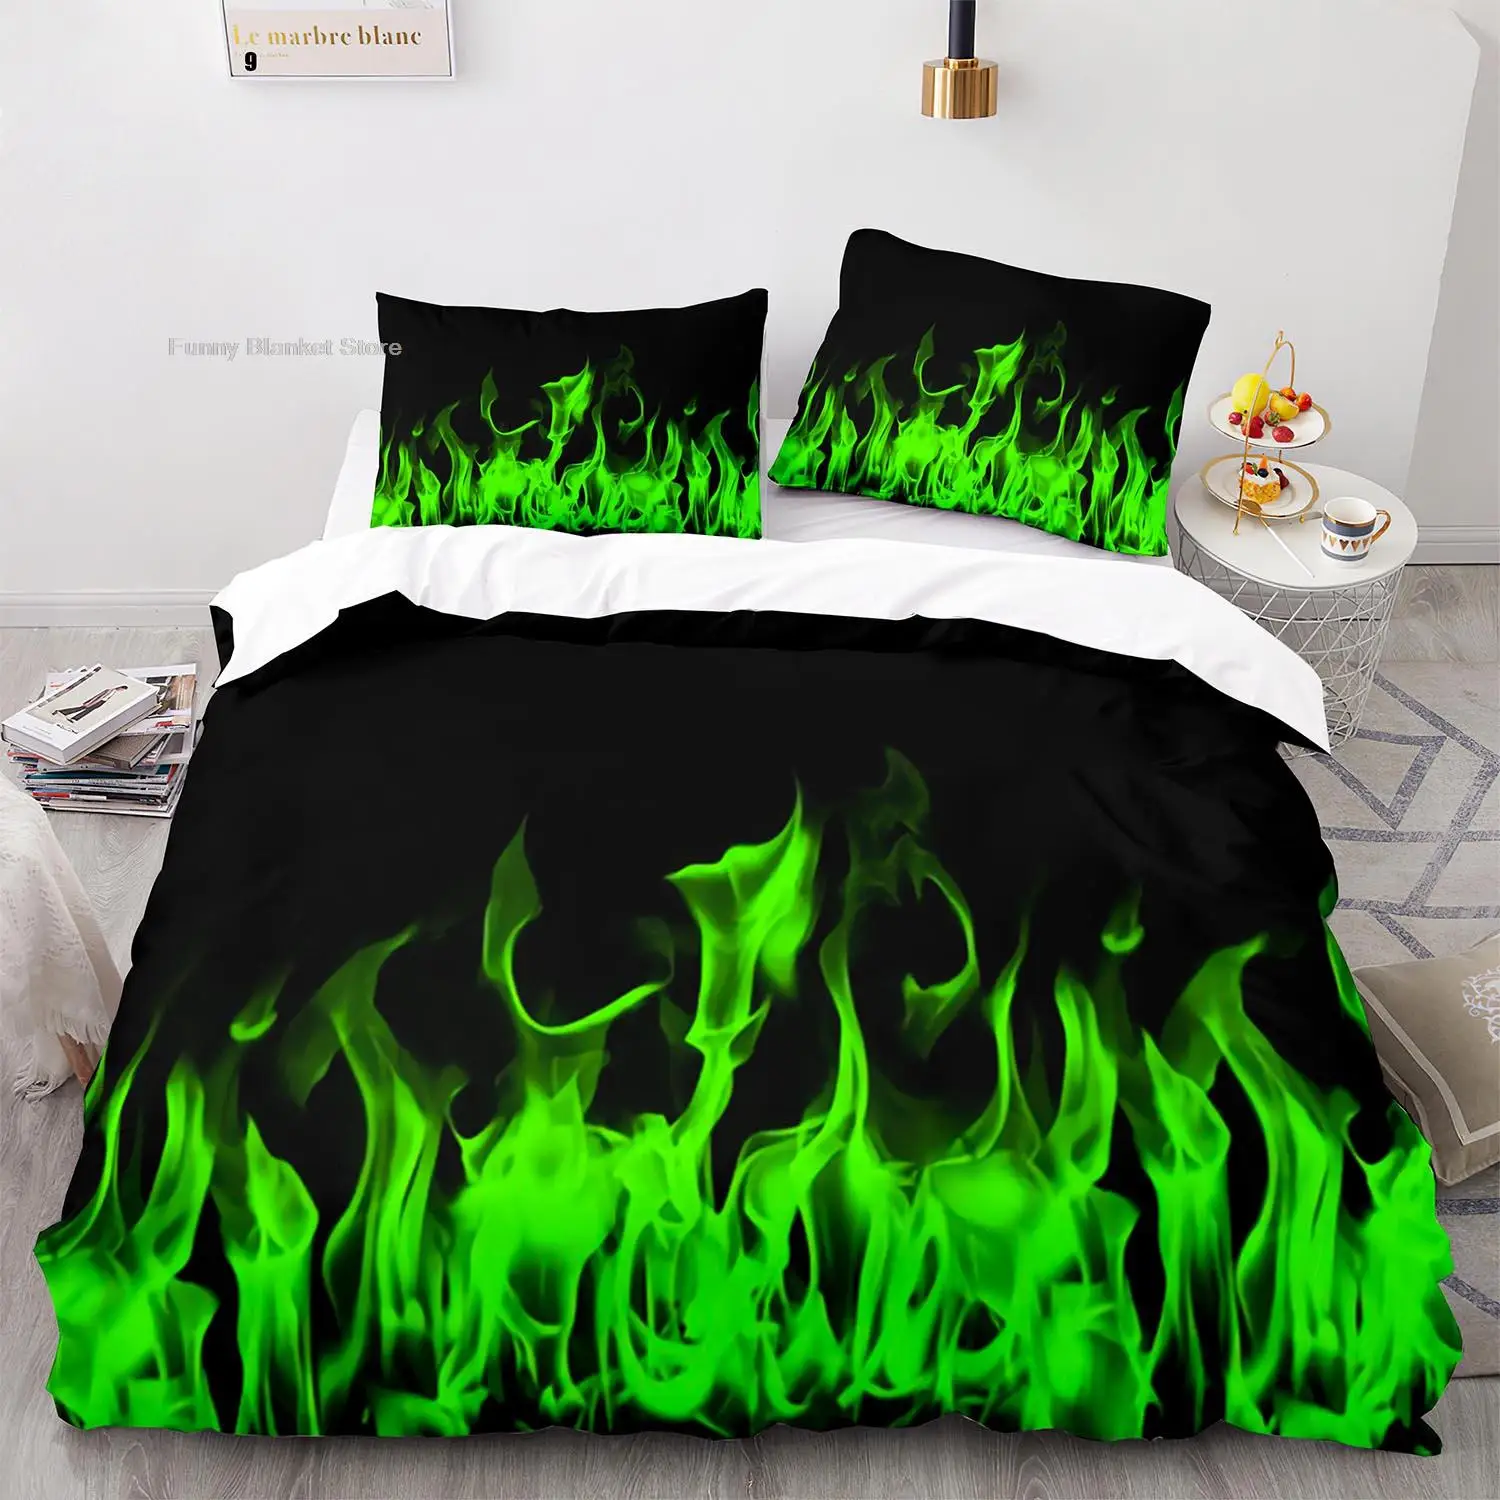 

Colorful Flame Bedding Set Single Twin Full Queen King Size Ice And Fire Blaze Bed Set Children Kid Bedroom постельное бельё 001